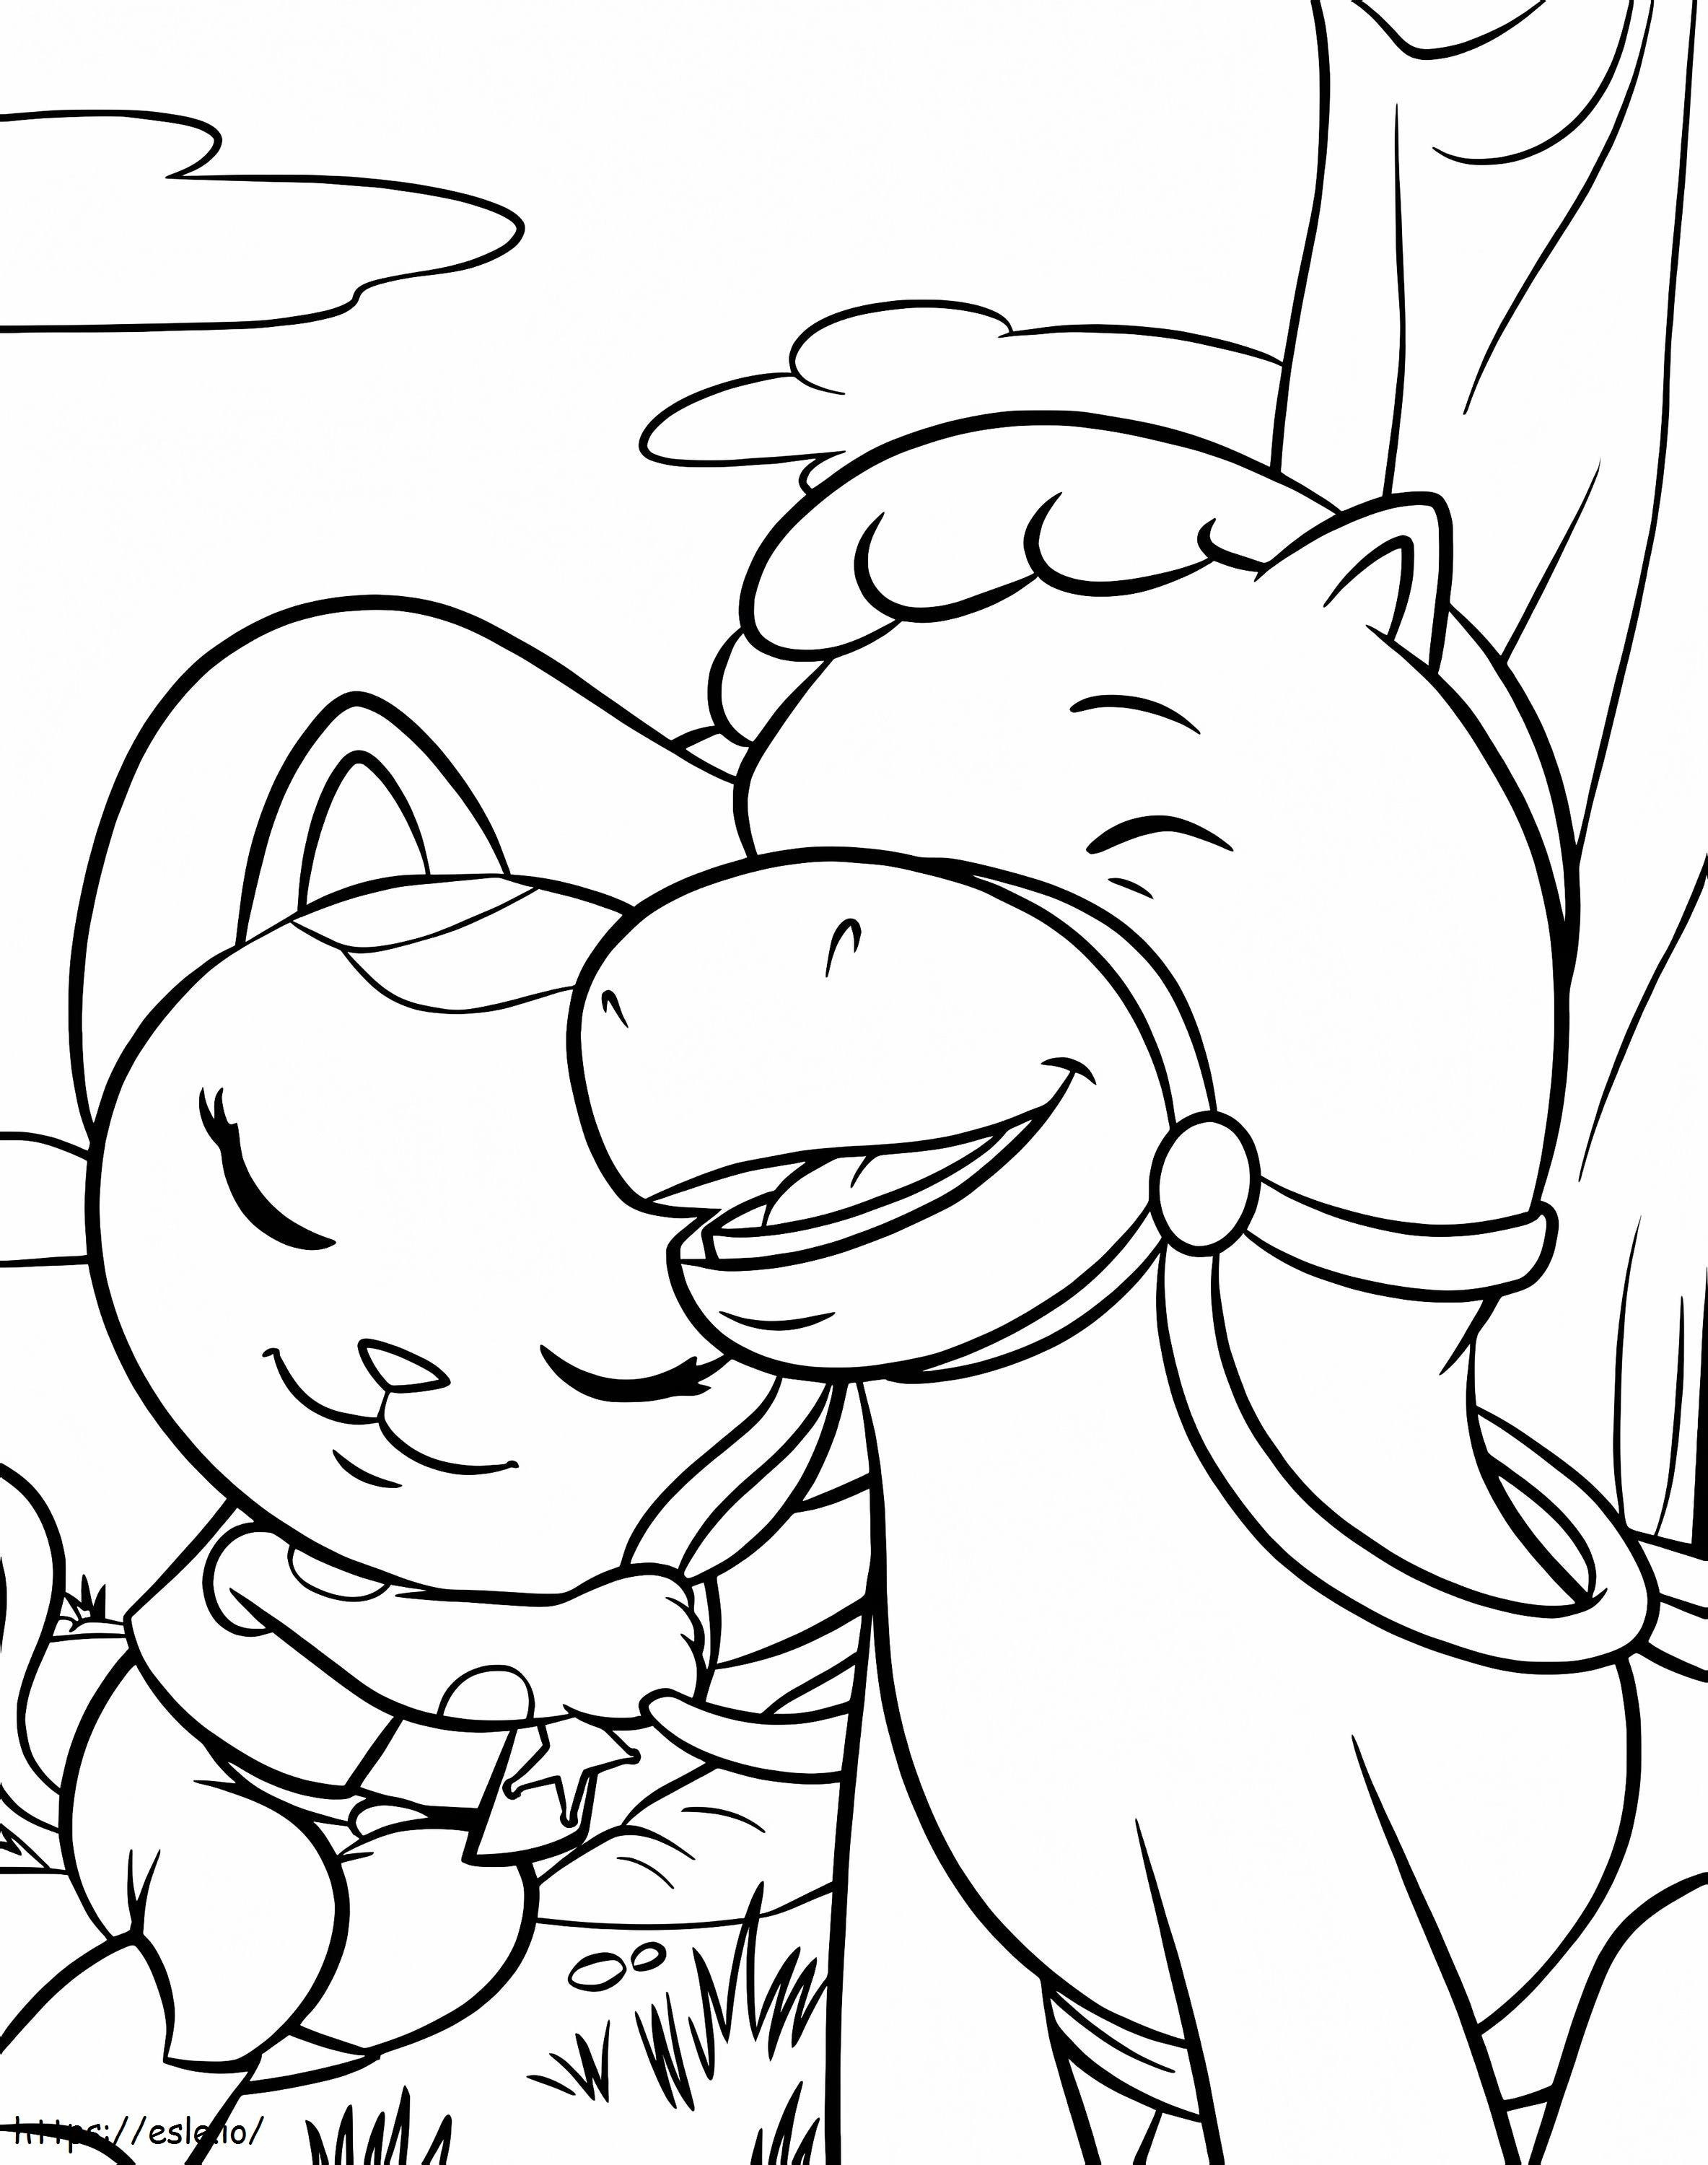 Happy Sheriff Callie And Sparky coloring page